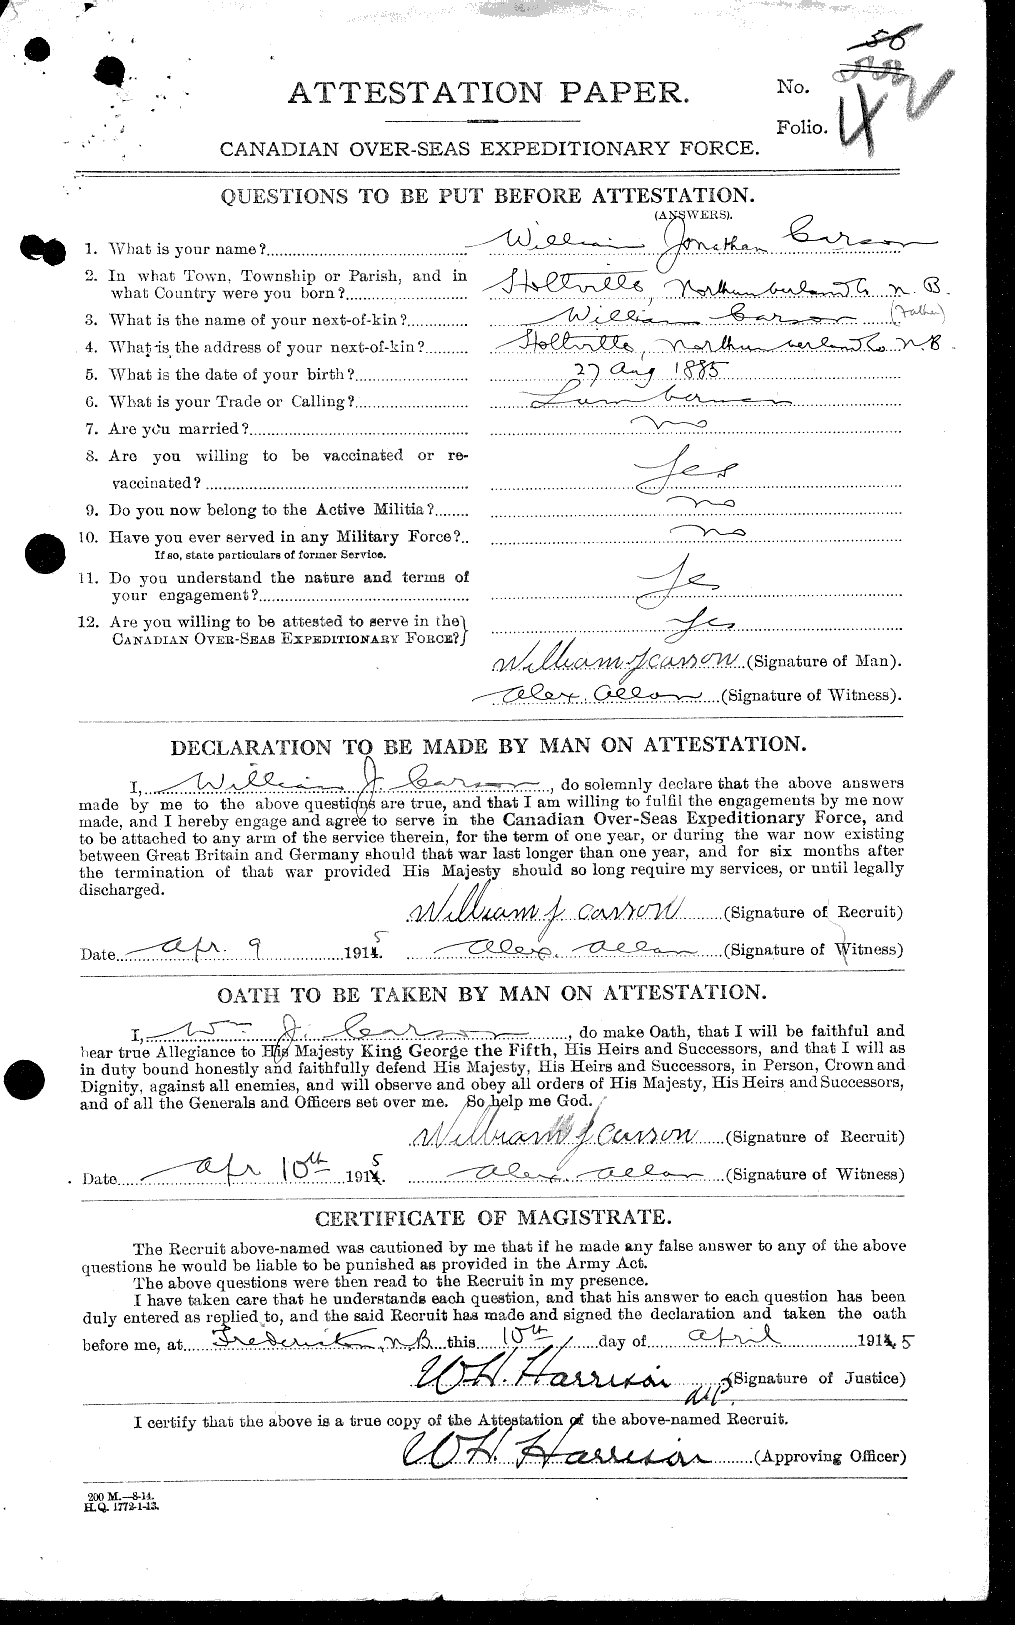 Personnel Records of the First World War - CEF 010877a